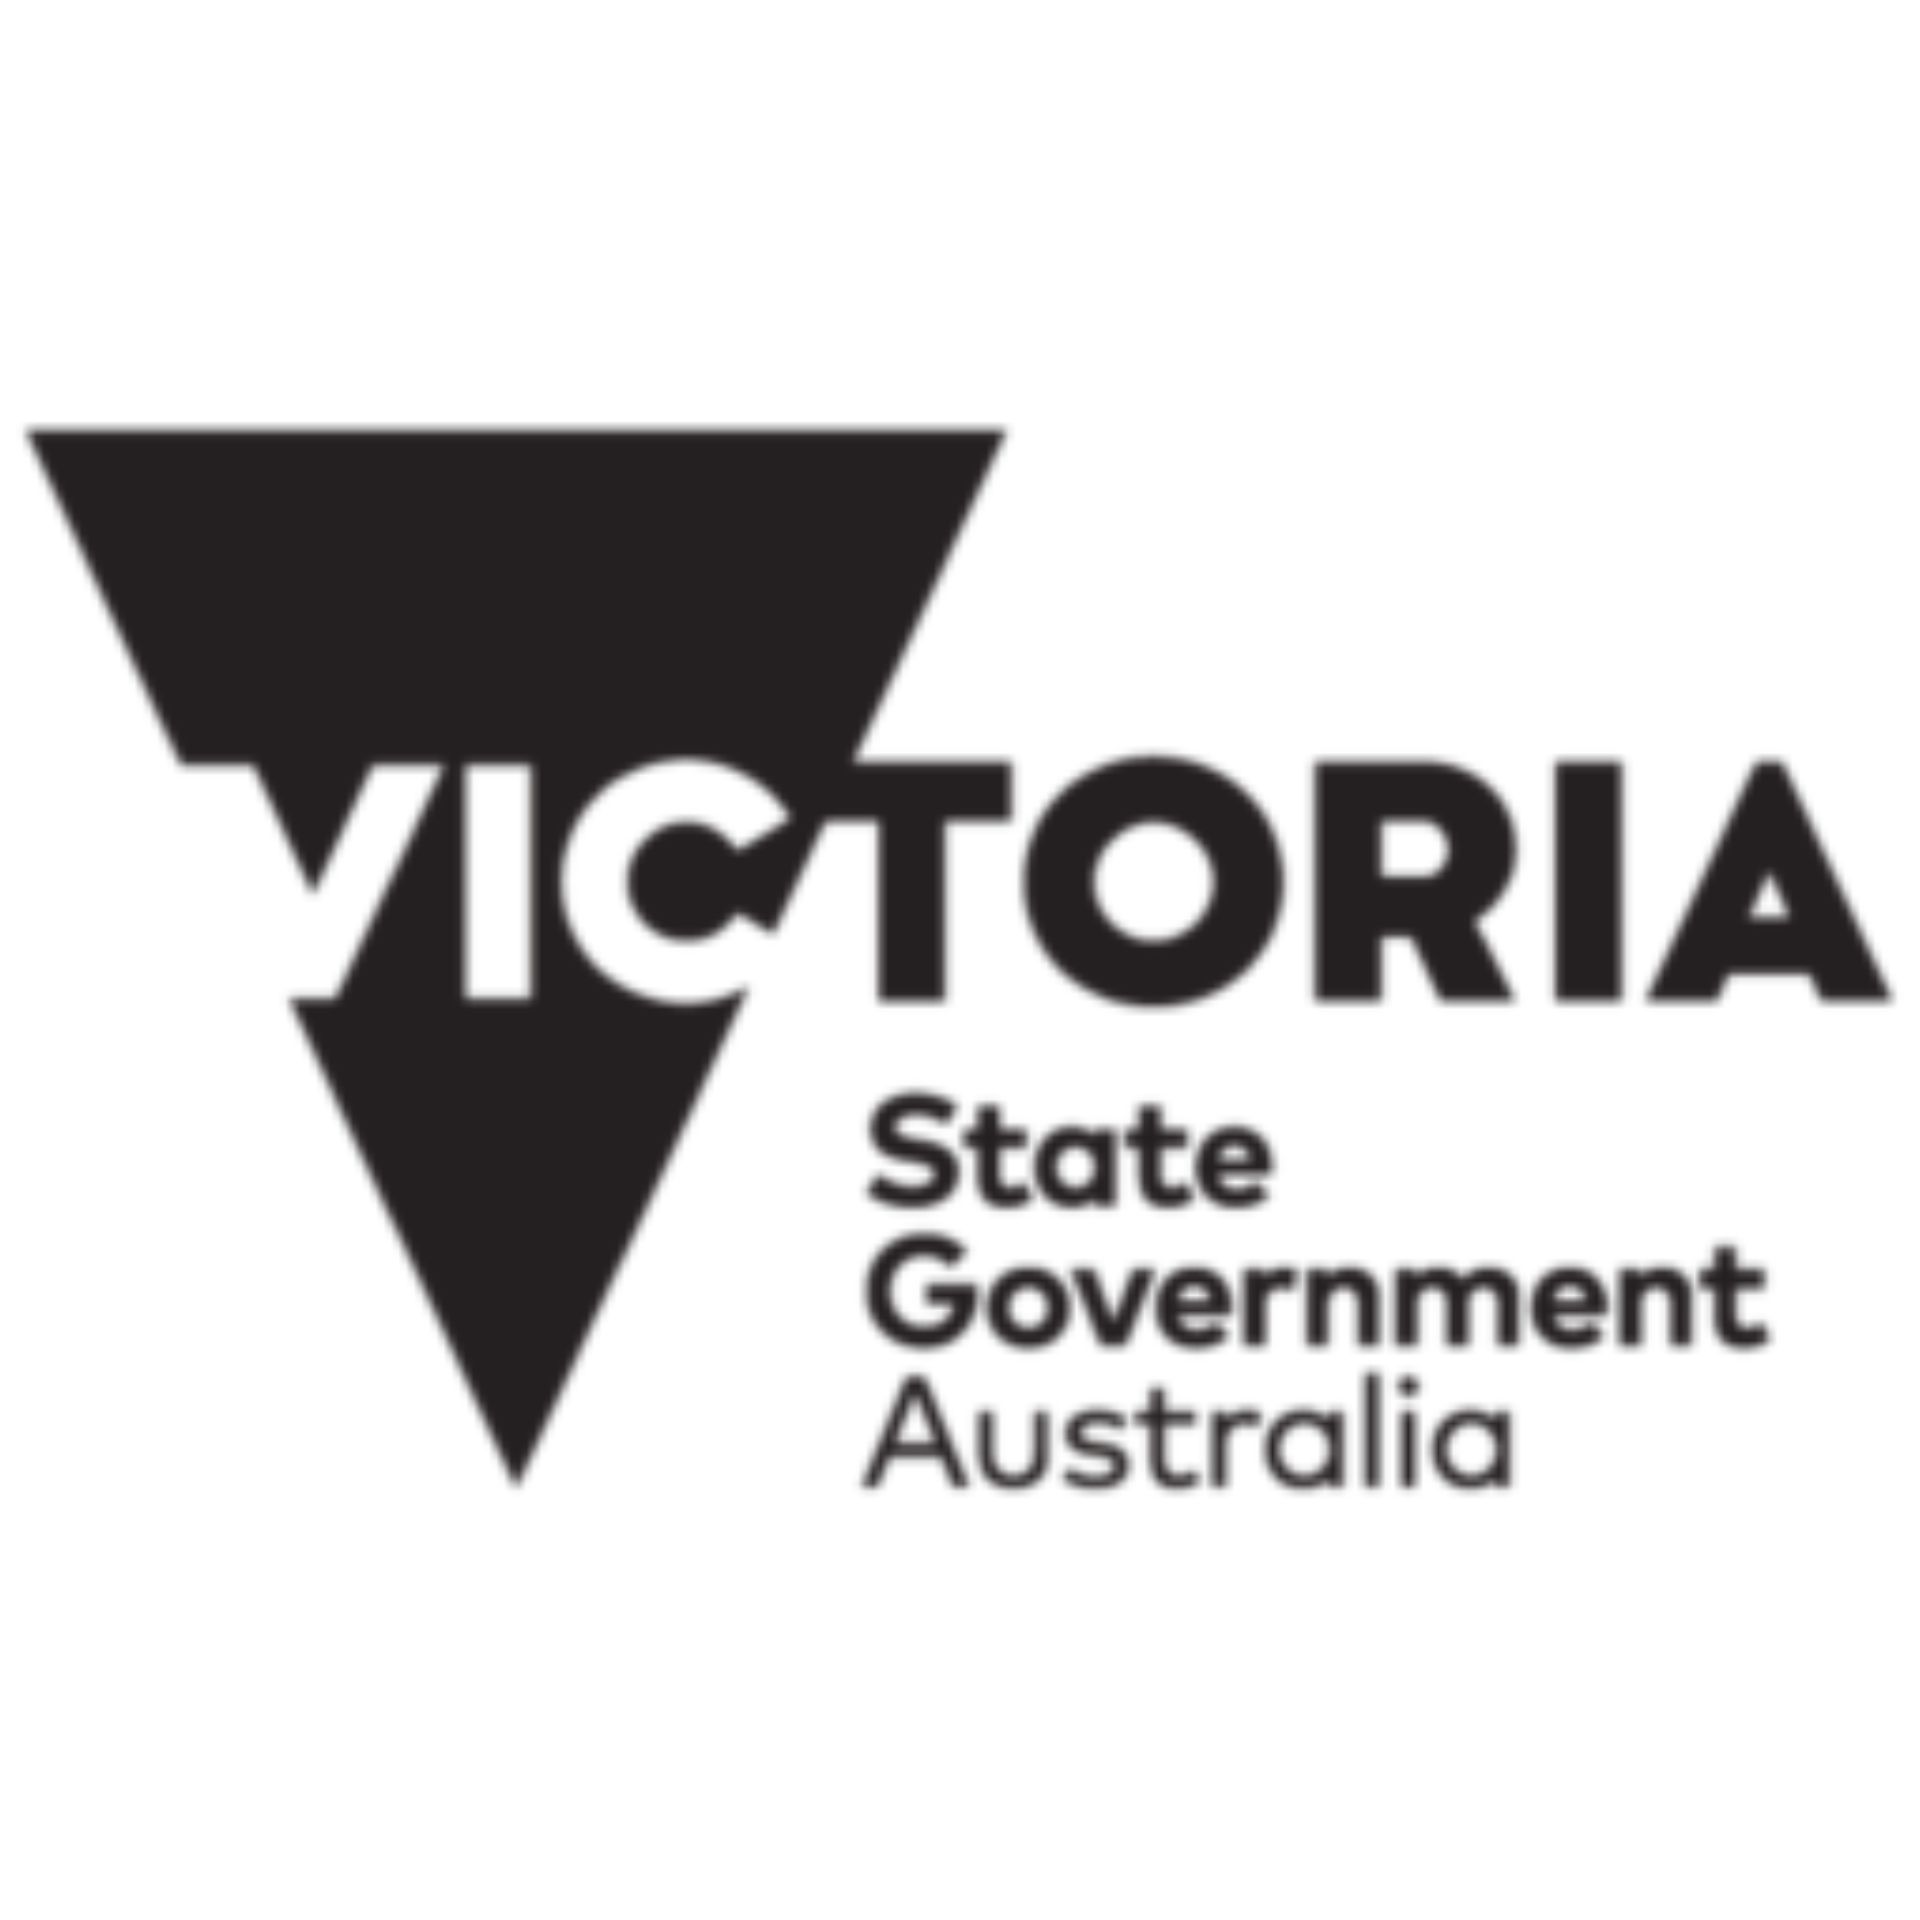 Victorian Government Multicultural Festivals and Events Program